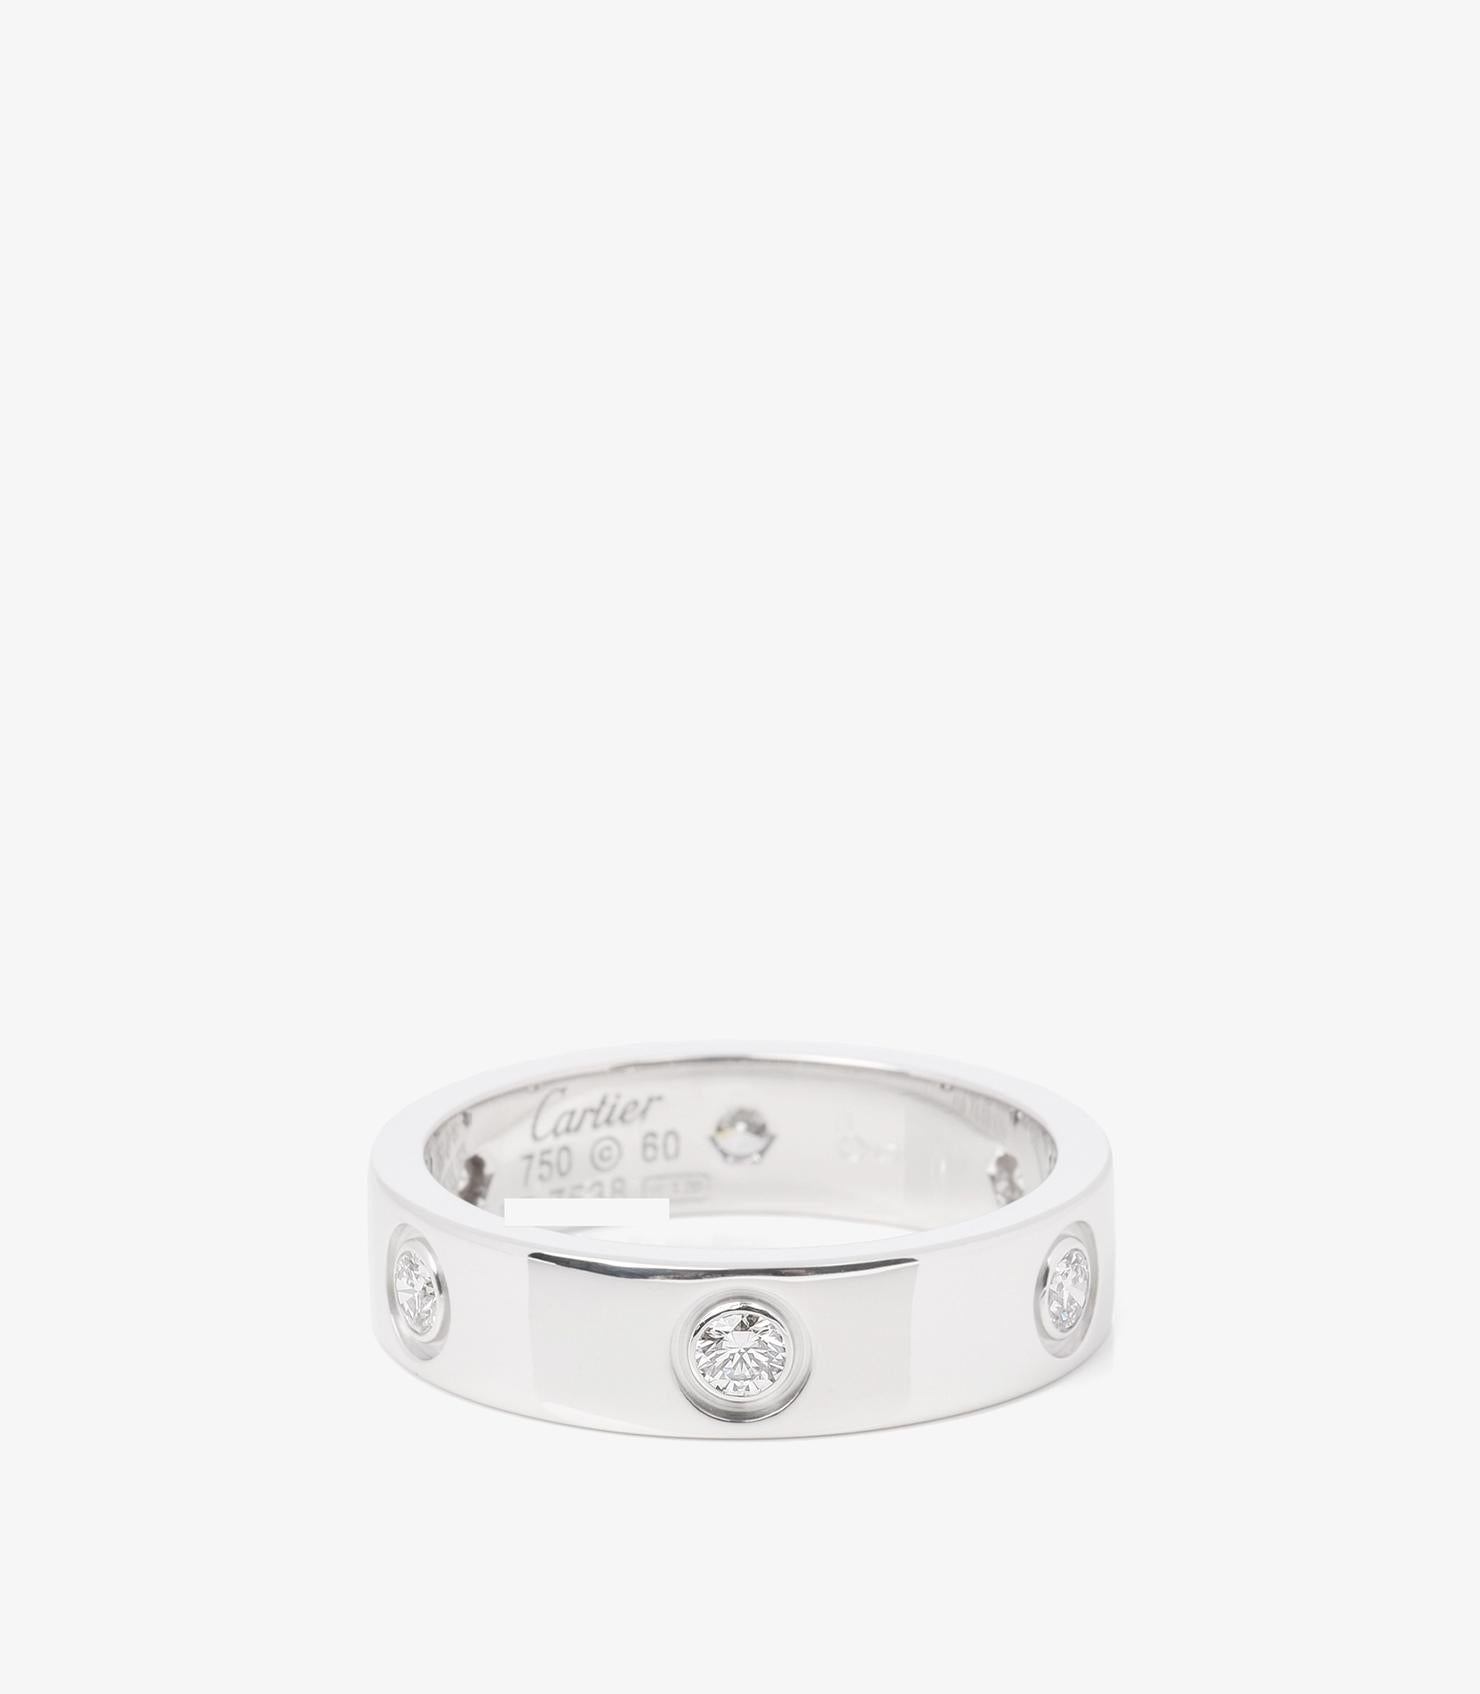 Cartier 6 Diamond 18ct White Gold Love Ring For Sale 1